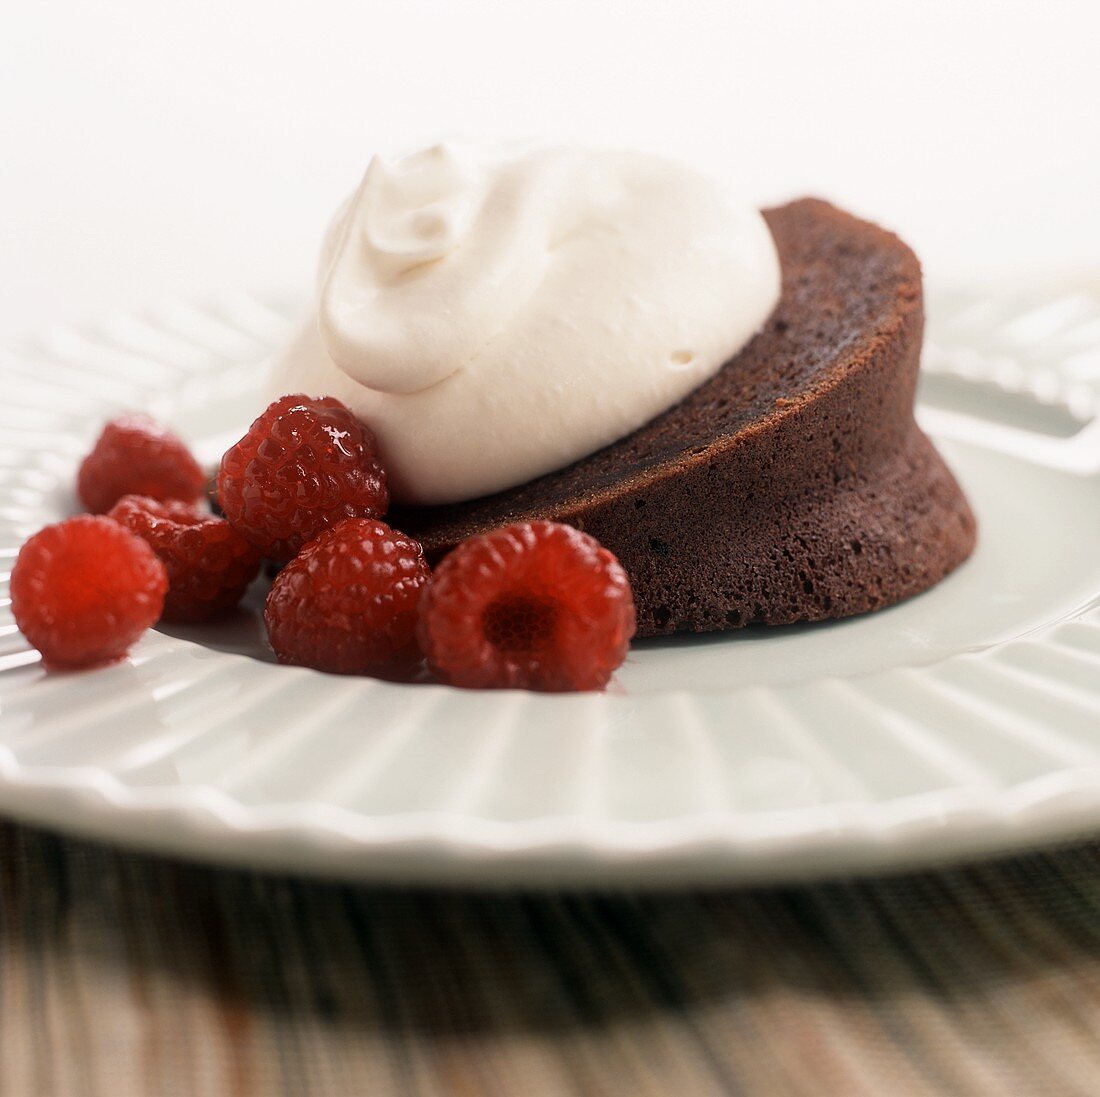 A Slice of Chocolate Bundt Cake with Whipped Cream and Raspberries